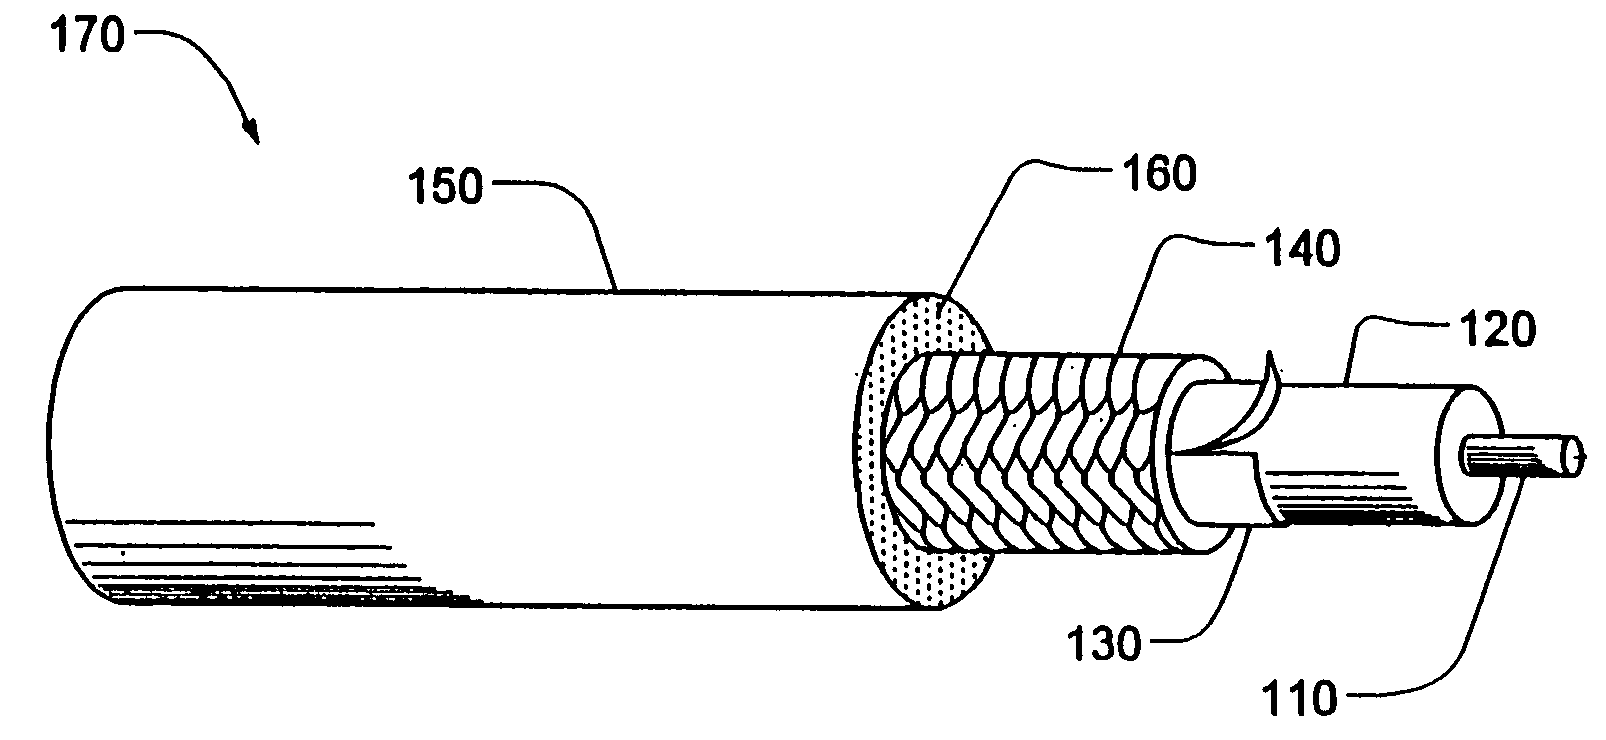 Coaxial cable for exterior use